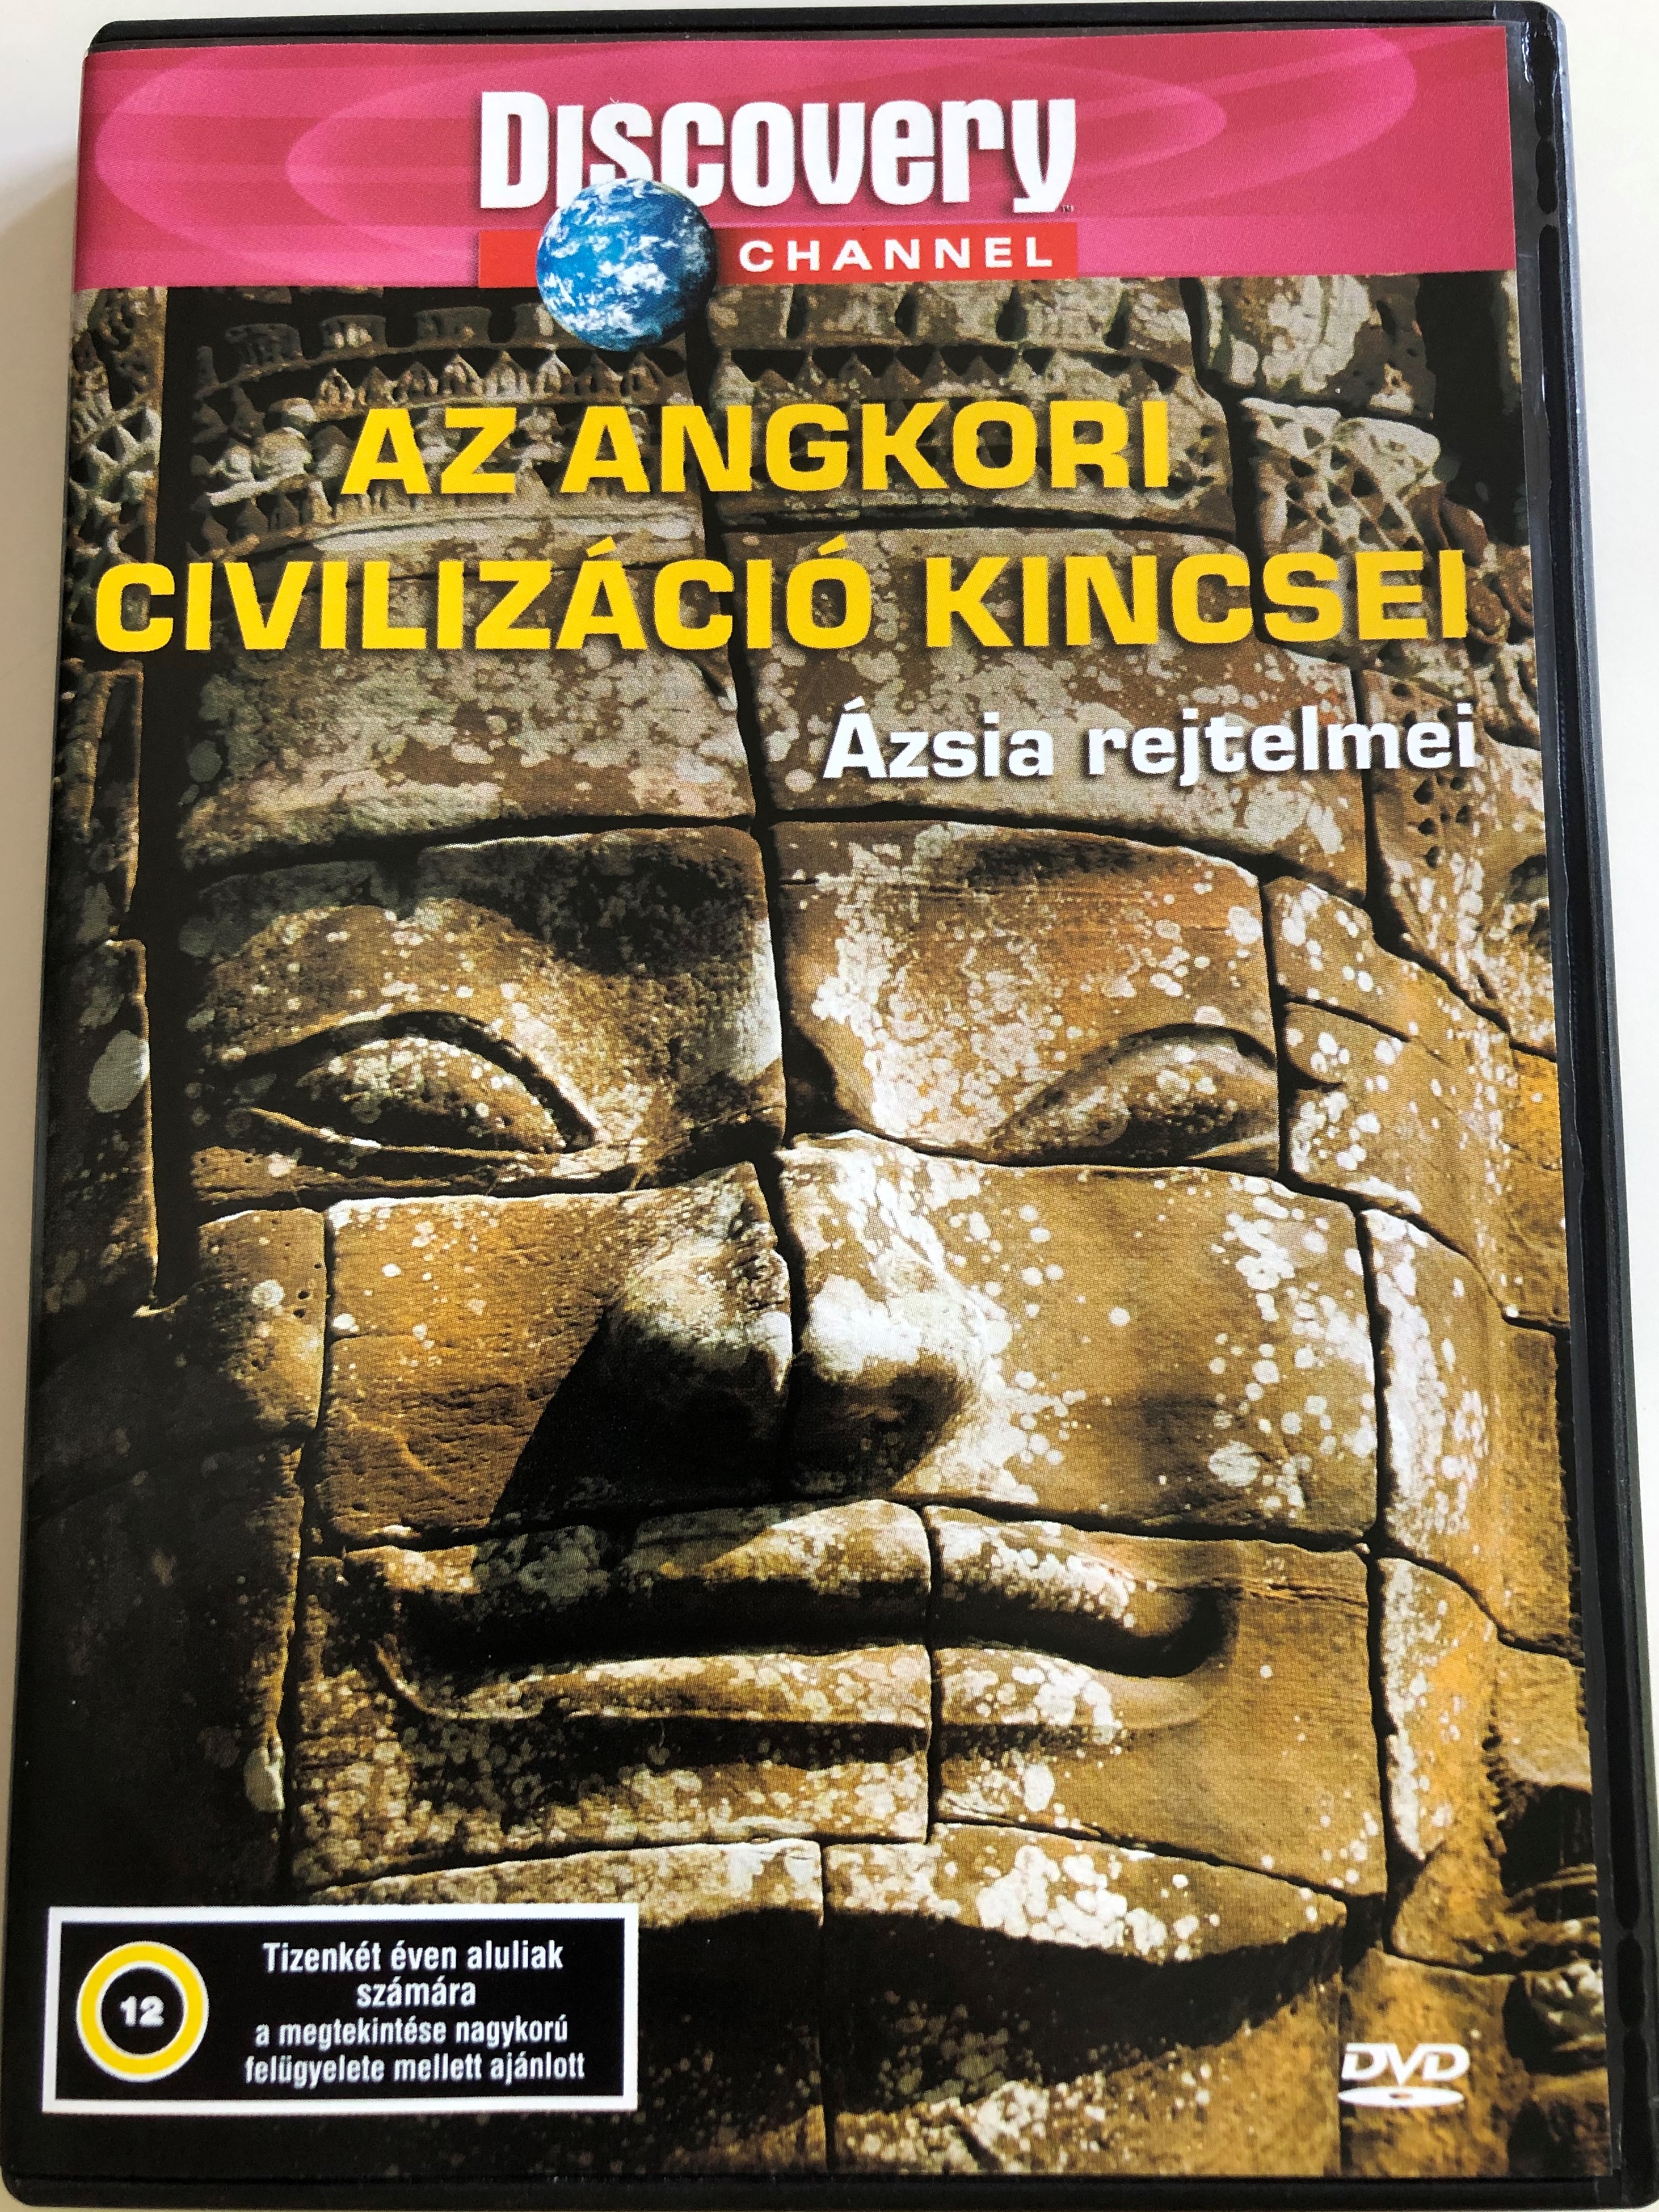 mysteries-of-asia-jewels-in-the-jungle-dvd-1999-az-angkori-civiliz-ci-kincsei-zsia-rejtelmei-produced-and-directed-by-peter-spry-leverton-discovery-channel-documentary-1-.jpg